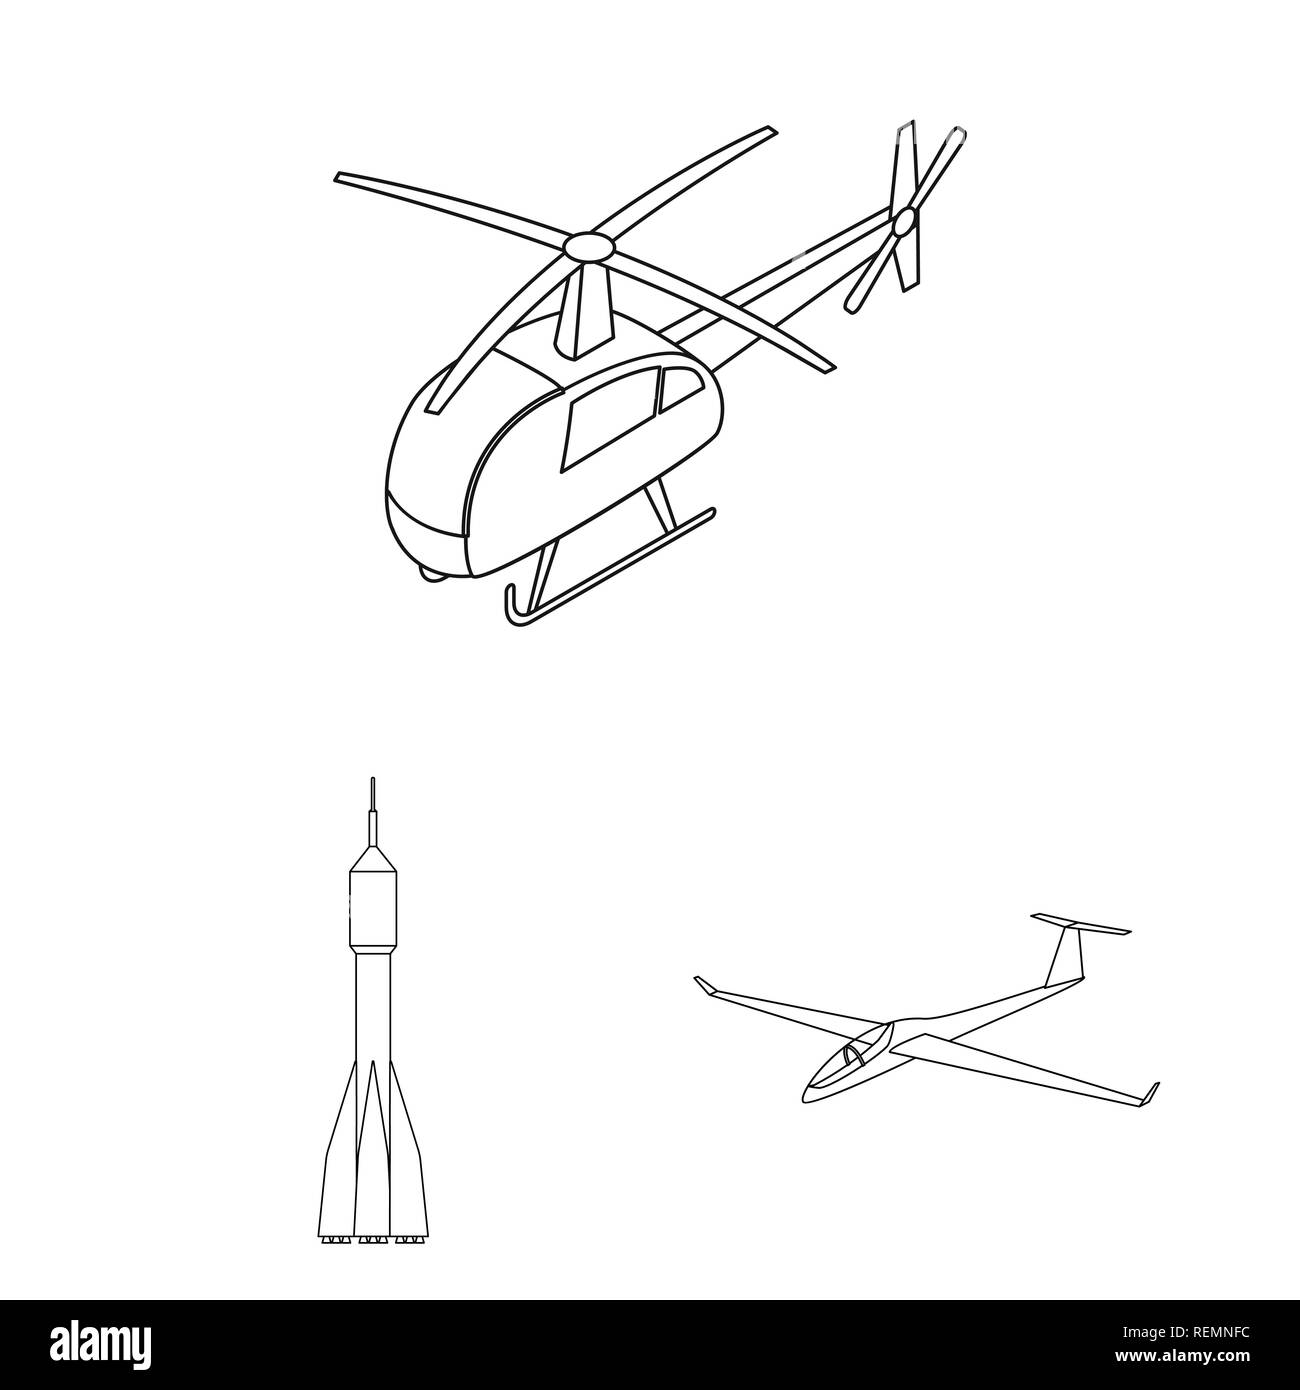 How to Draw a Helicopter Video | Discover Fun and Educational Videos That  Kids Love | Epic Children's Books, Audiobooks, Videos & More